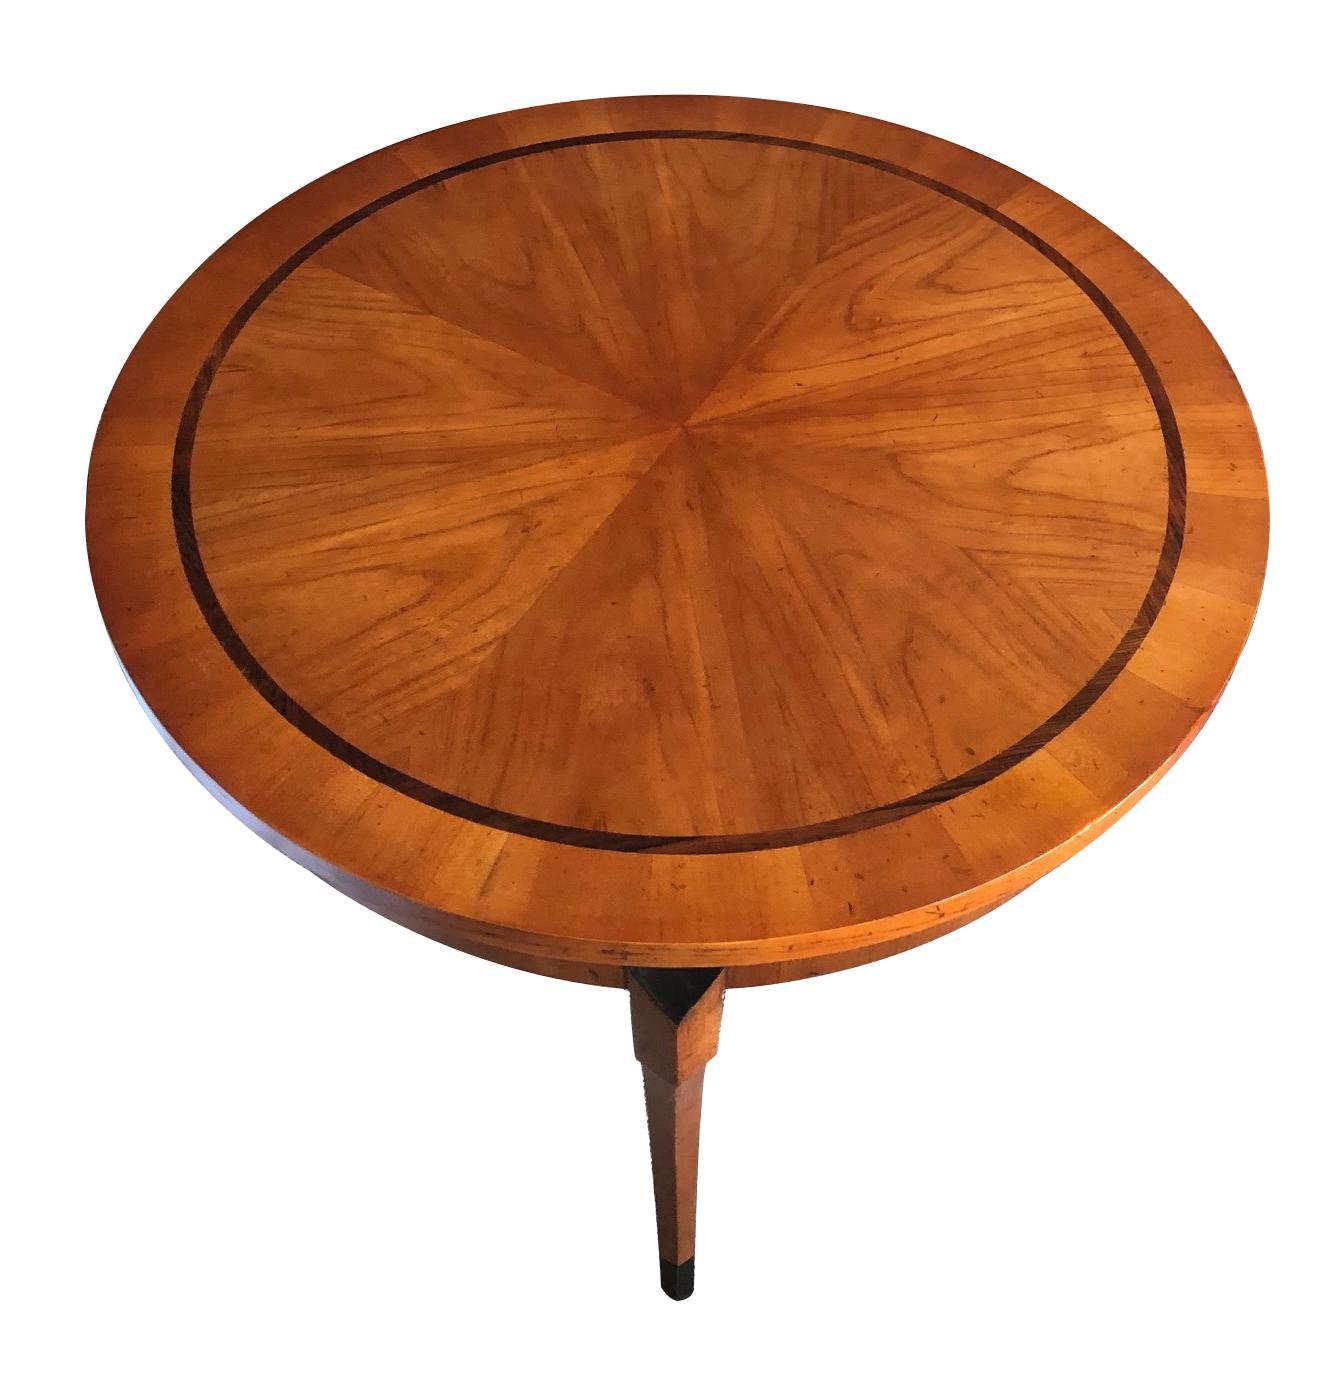 The well-figured round top of book-matched pie slice veneer within a rosewood perimeter band; all raised on three gracefully splayed legs with ebonized tips.